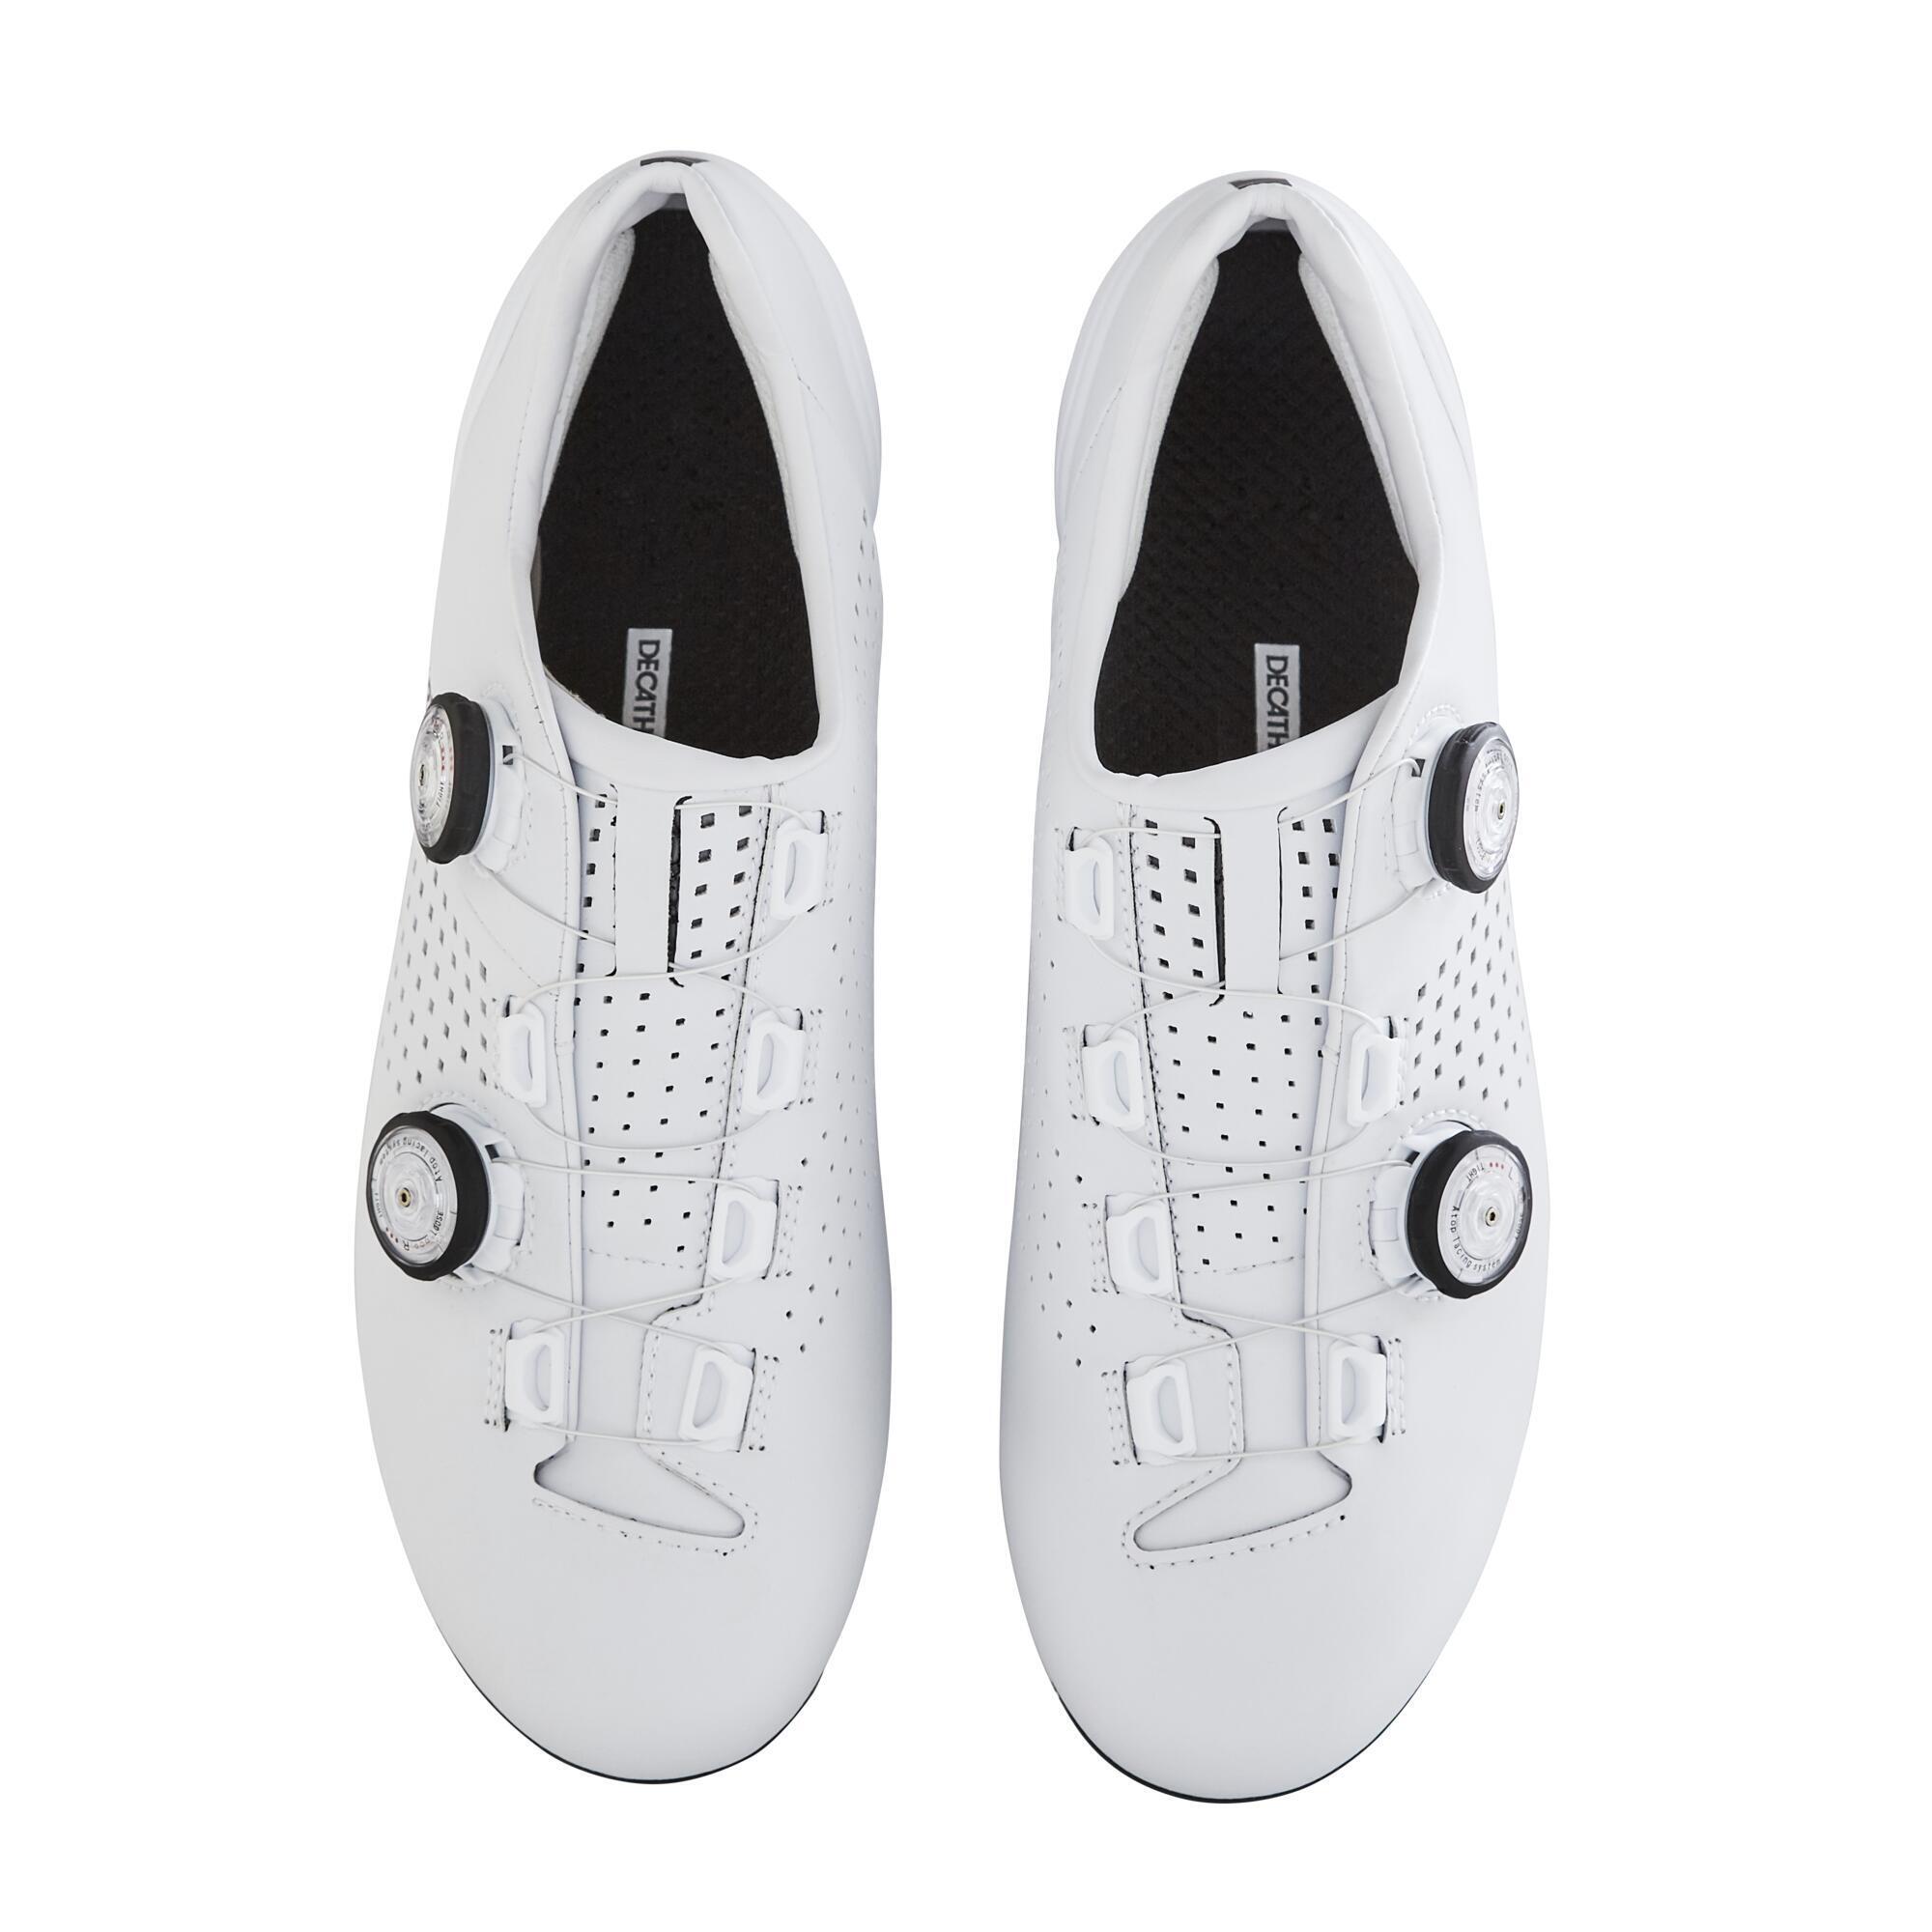 RoadR 900 Full Carbon Road Cycling Shoe - White 4/6